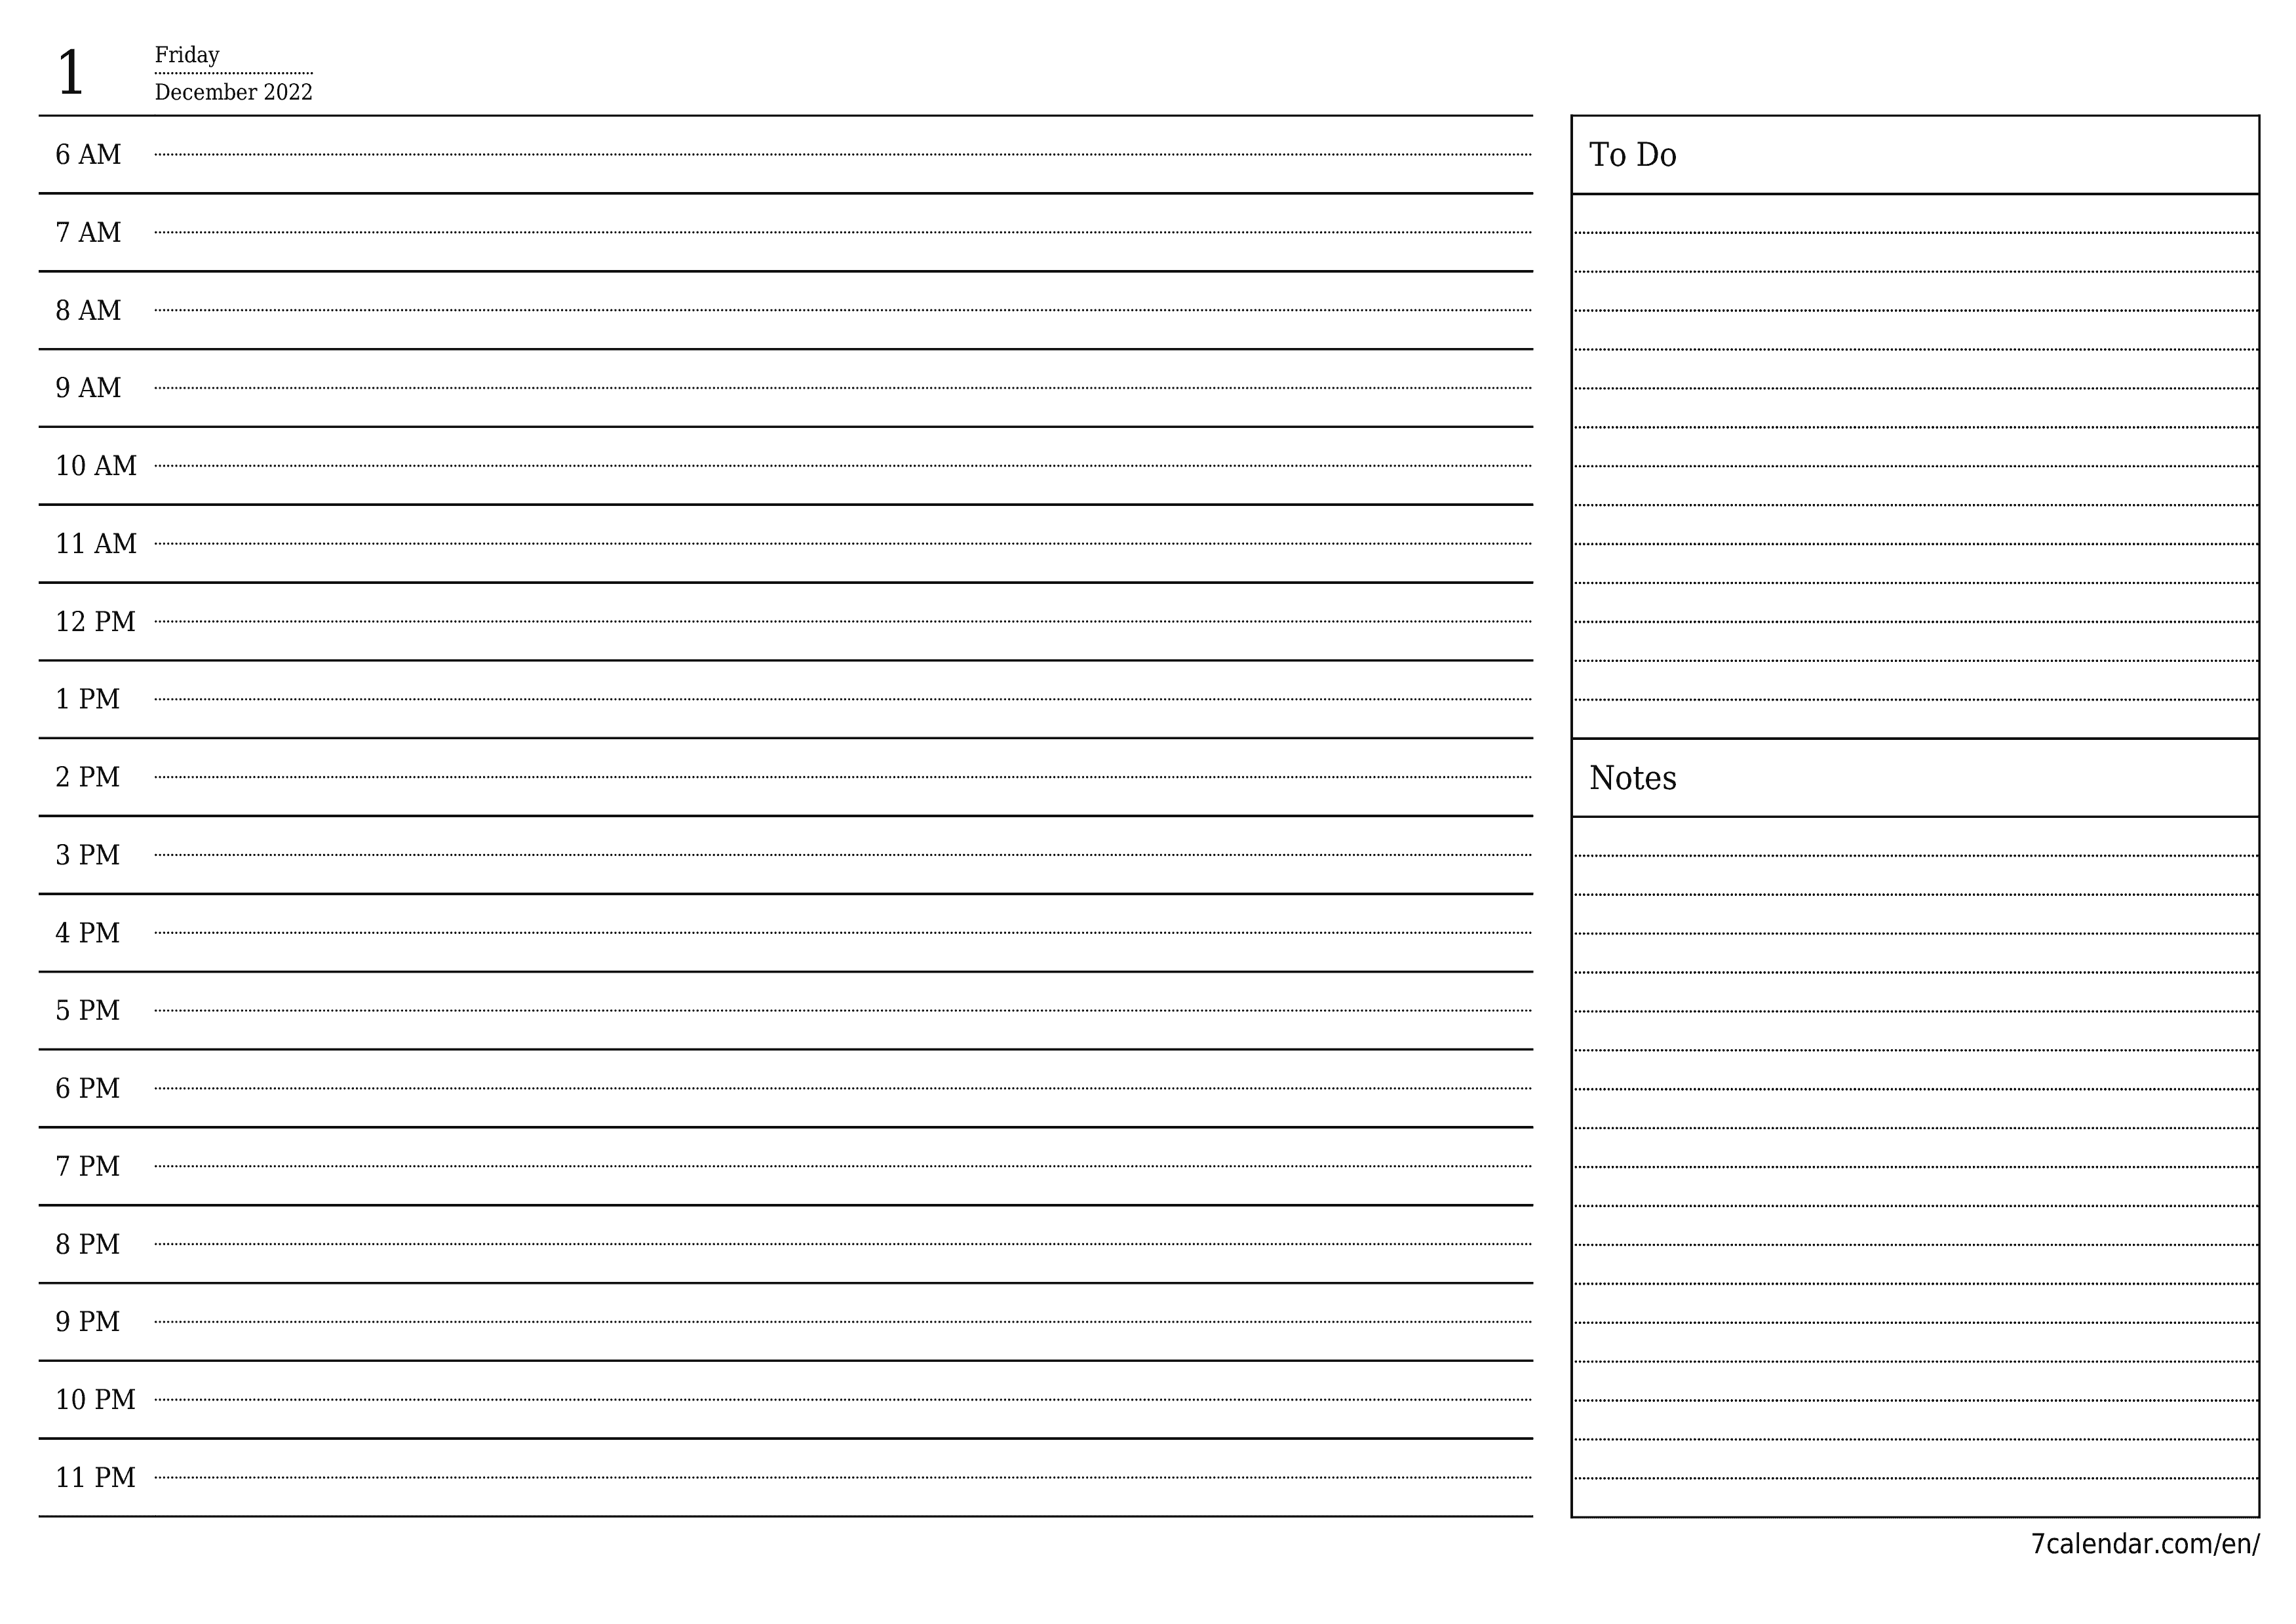 Blank daily calendar planner for day December 2022 with notes, save and print to PDF PNG English - 7calendar.com